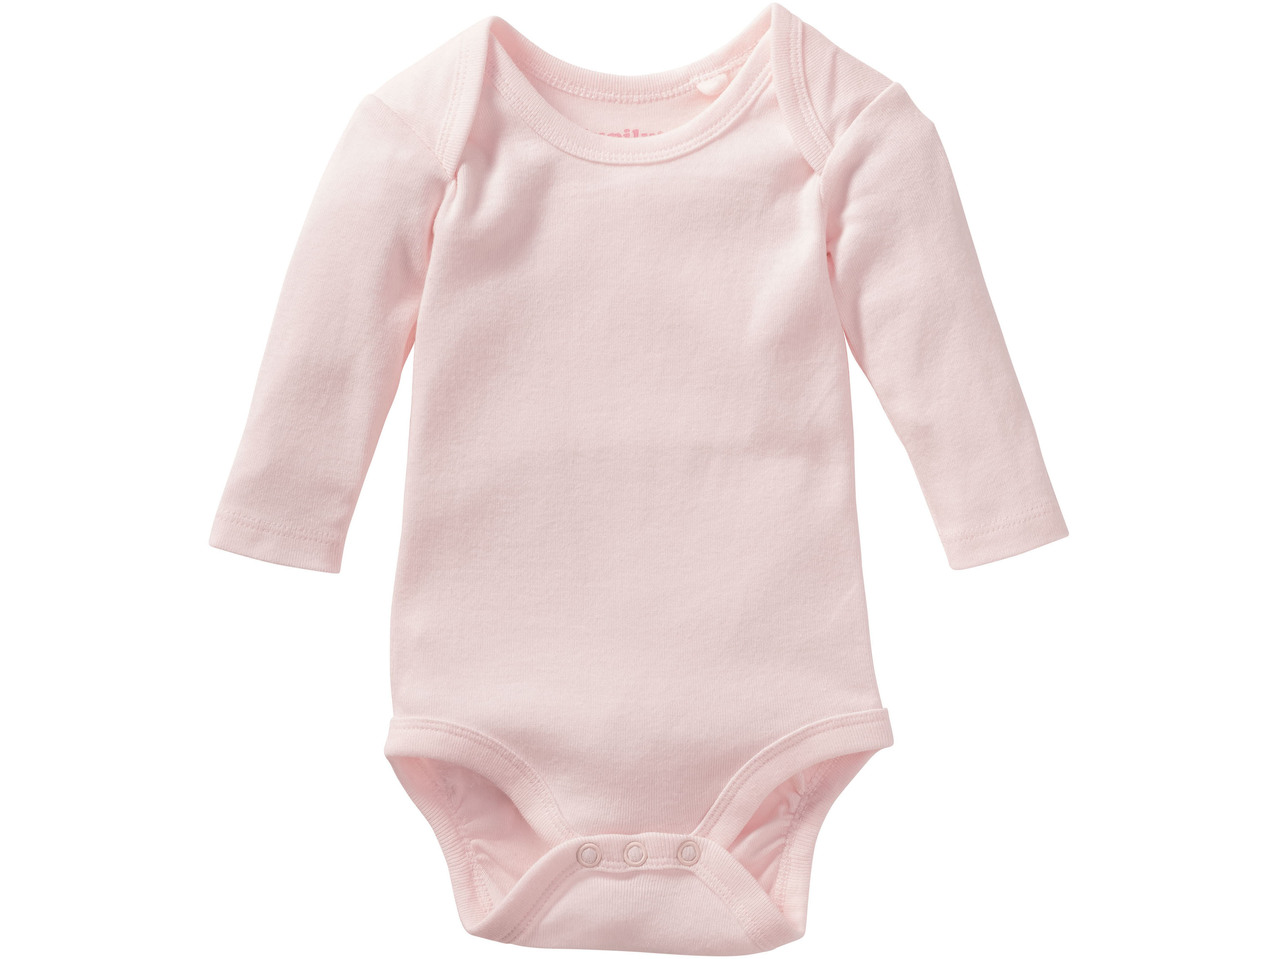 Baby Girls' Long Sleeve Bodysuits, 5 pieces